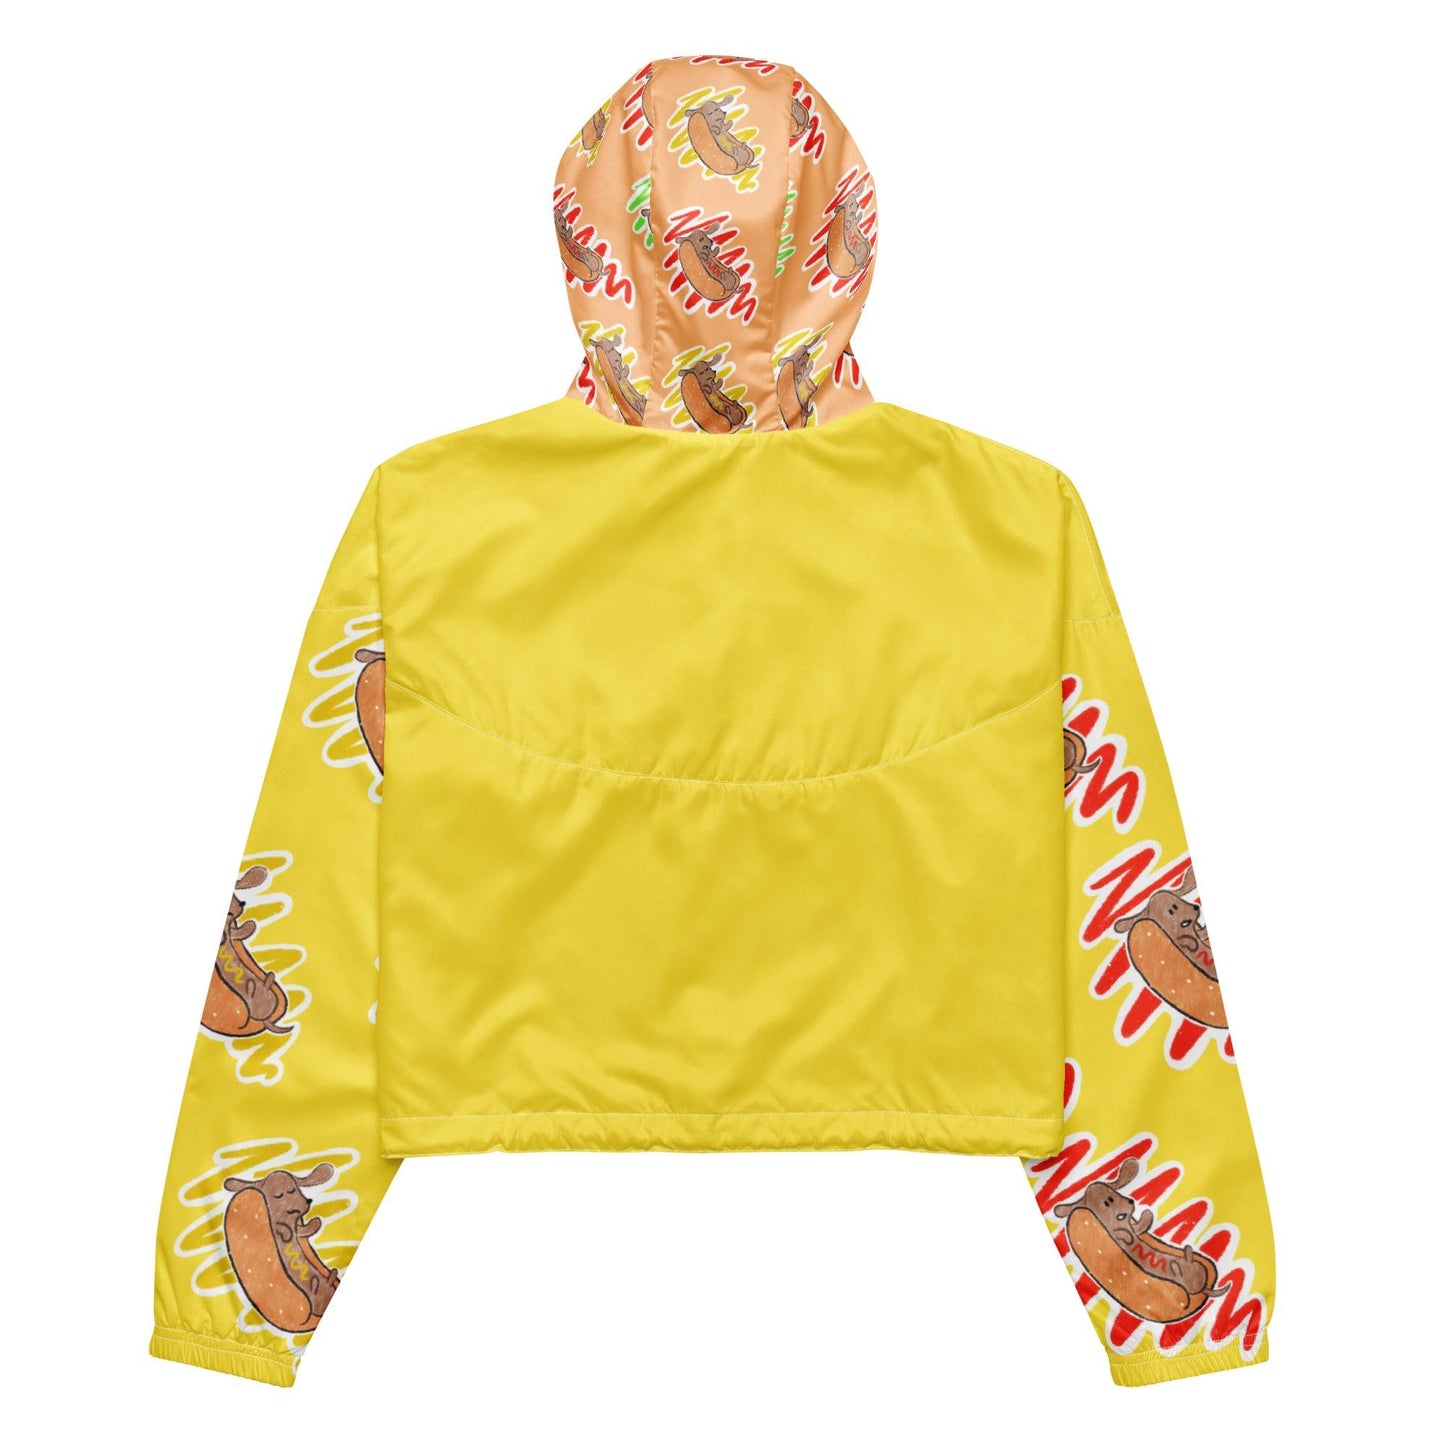 Shop Yellow and Orange Dachshund Print Cropped Raincoat by Boogs & Boop